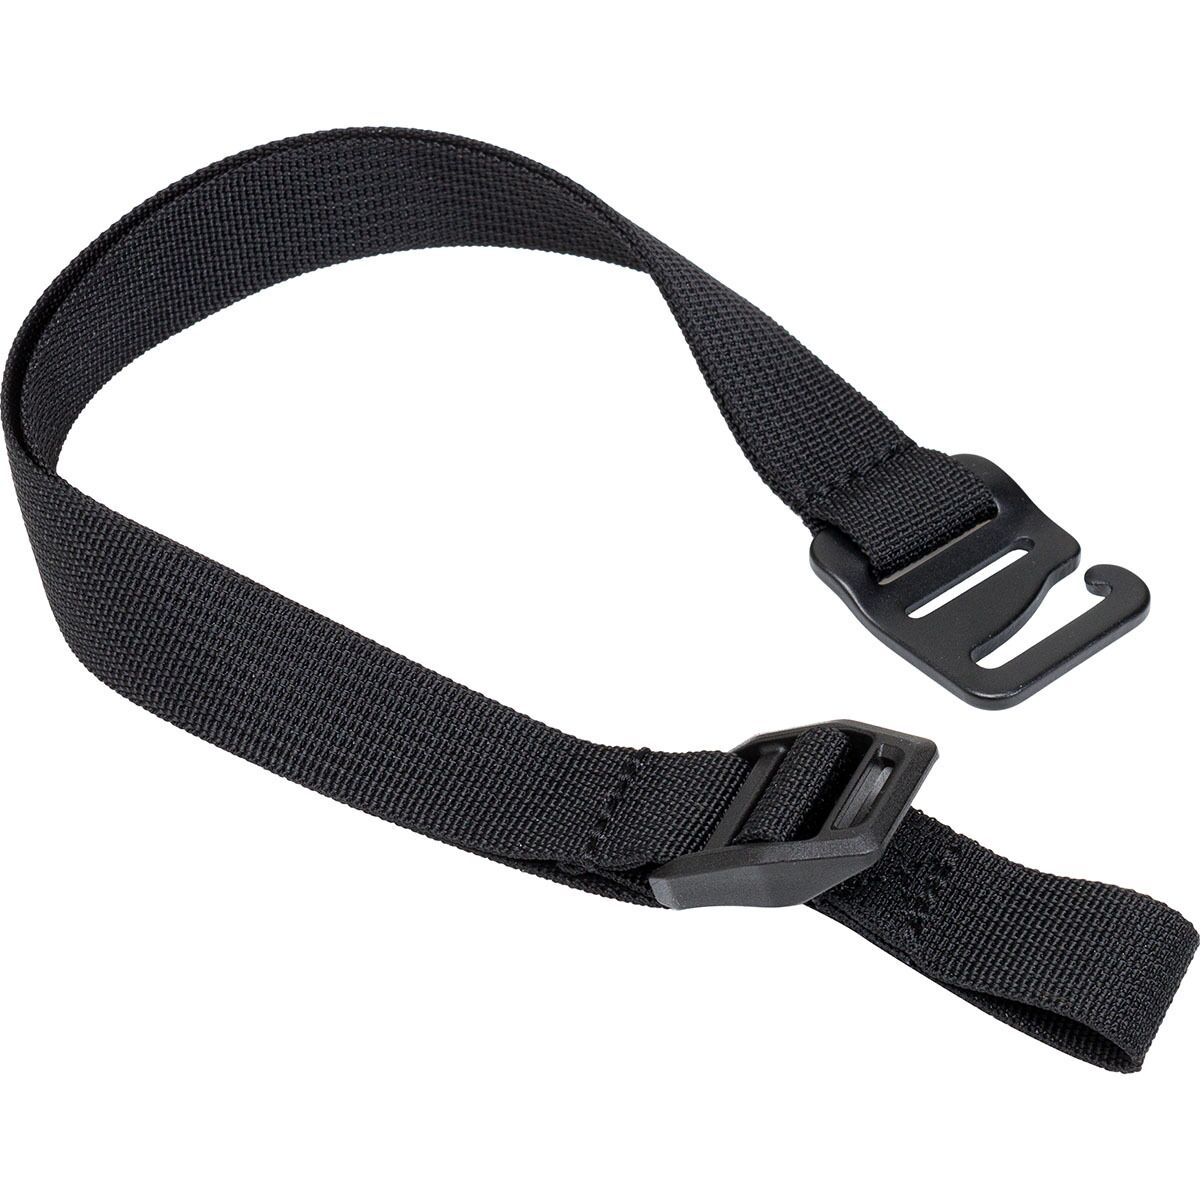 ABS Avalanche Rescue Devices A.Light Diagonal Ski Holding Strap Black